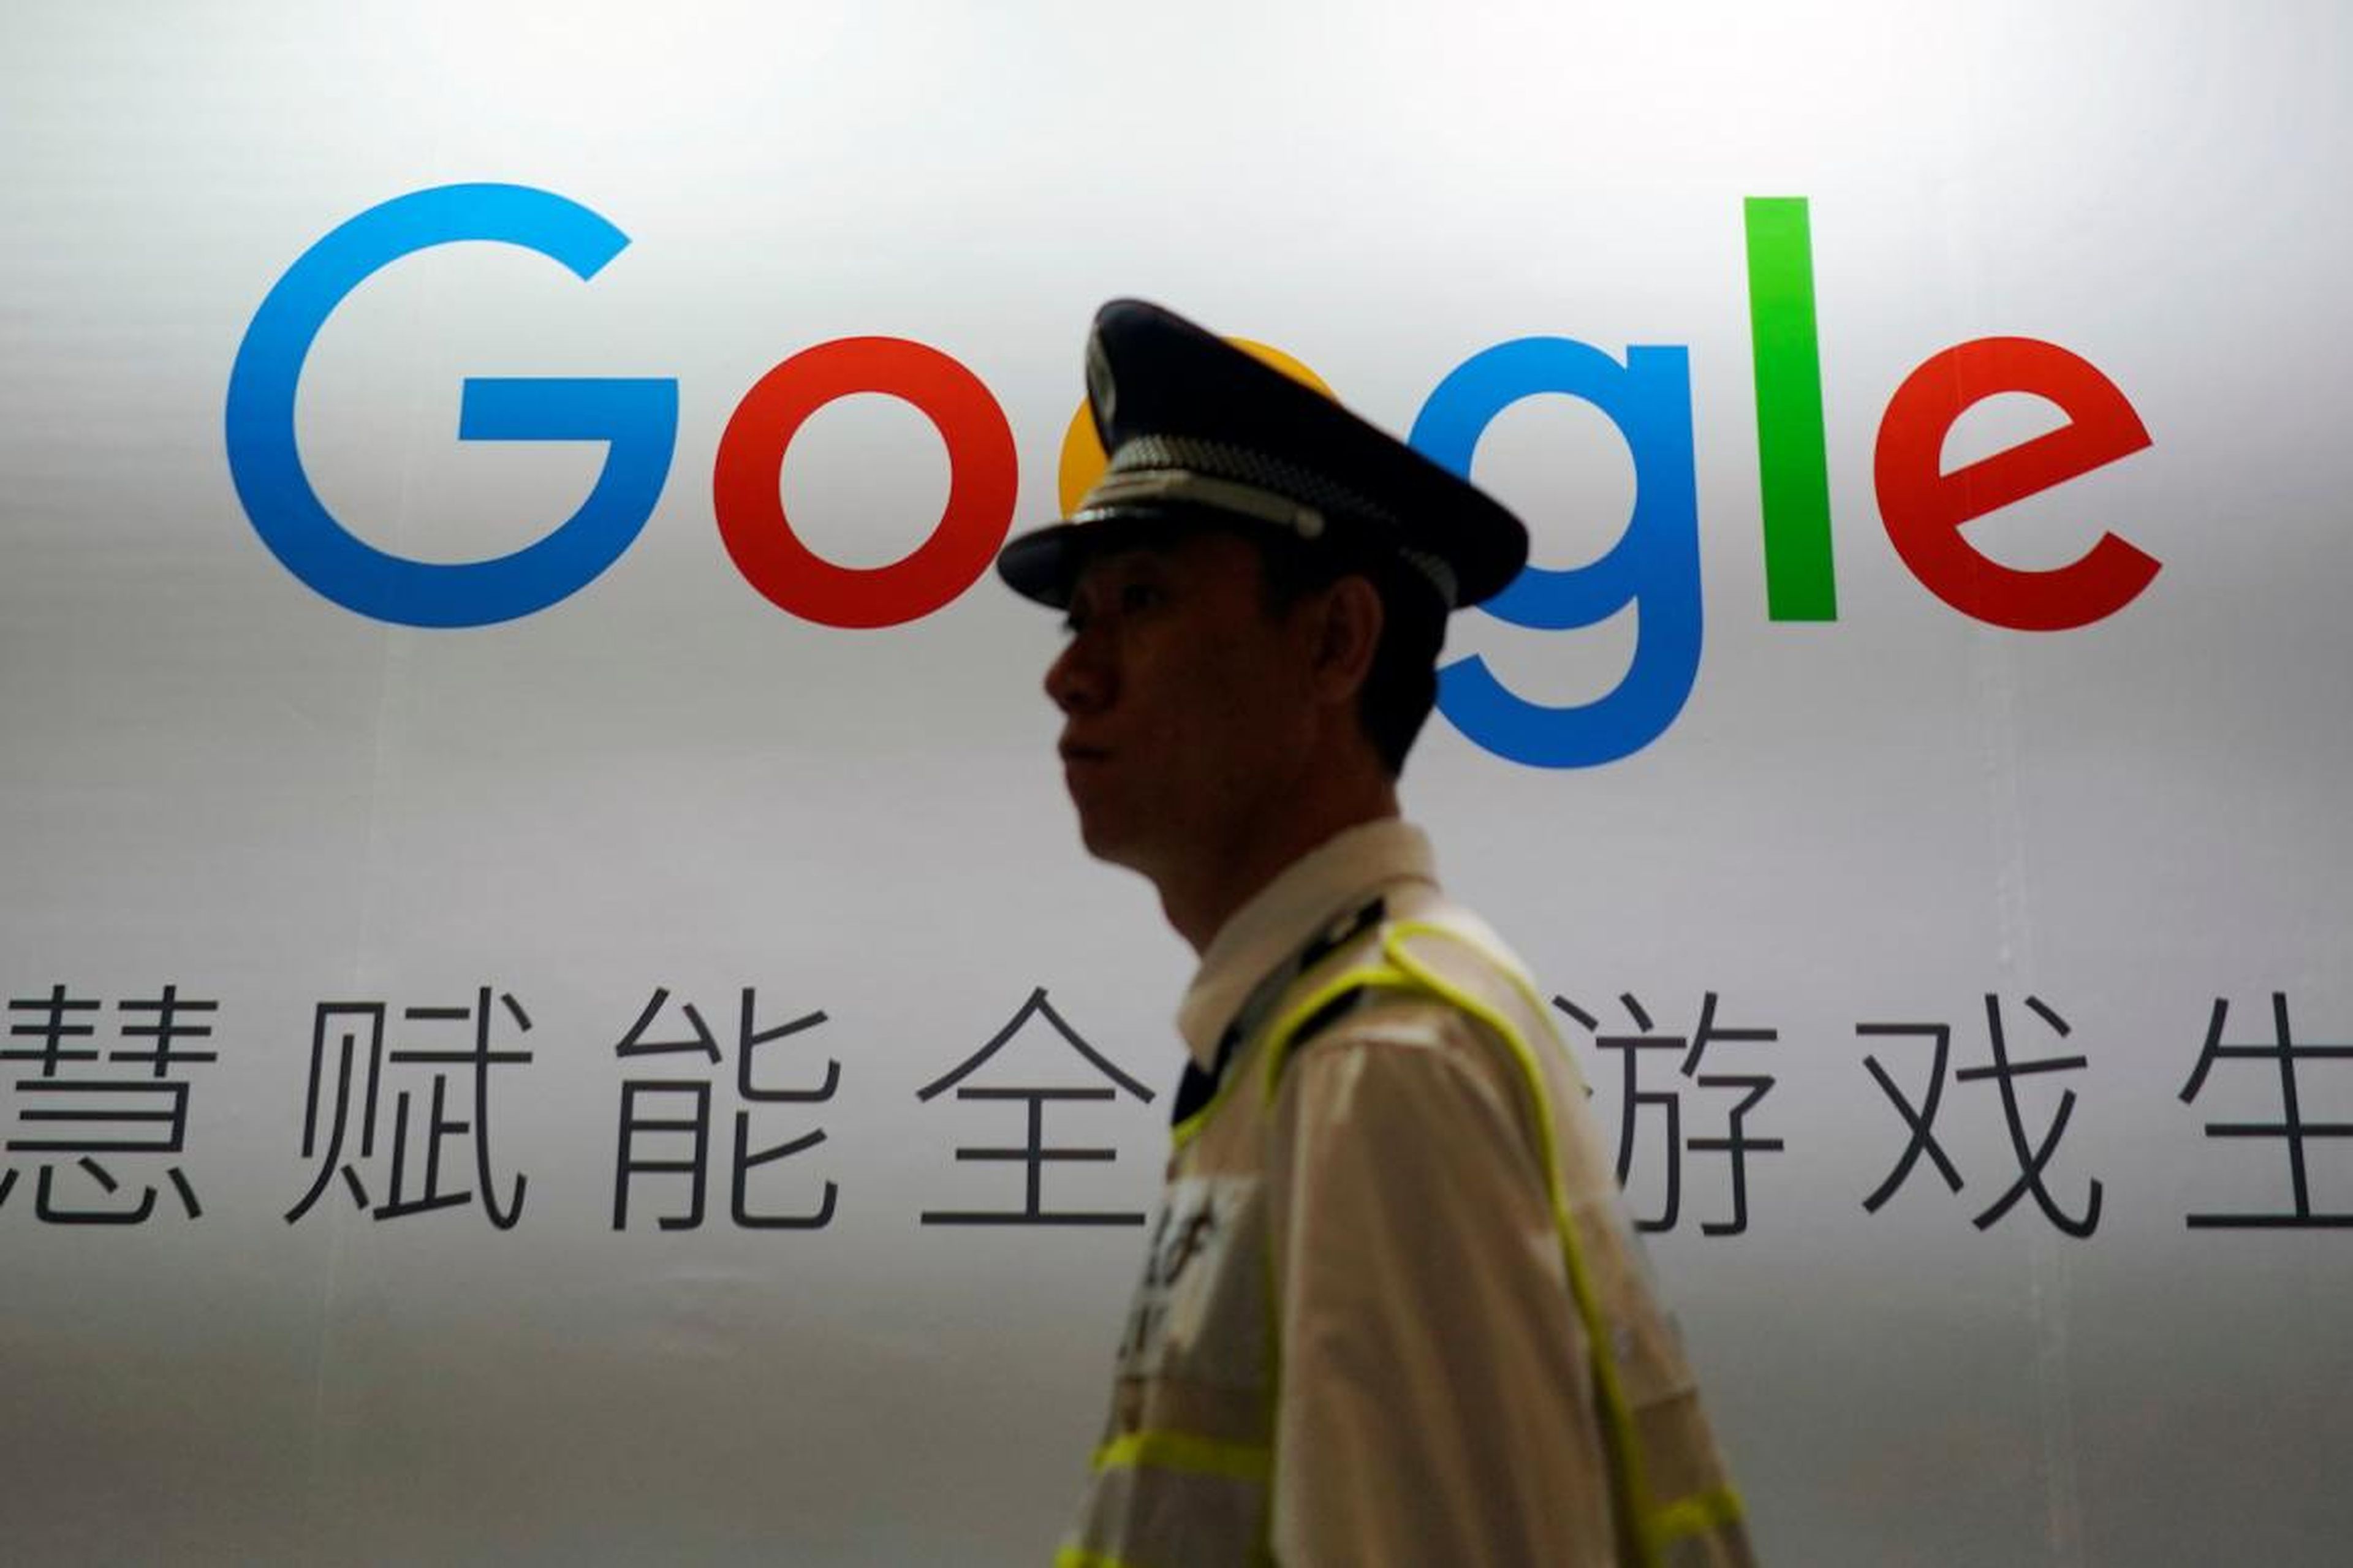 A Google sign is seen during the China Digital Entertainment Expo and Conference (ChinaJoy) in Shanghai, China August 3, 2018.